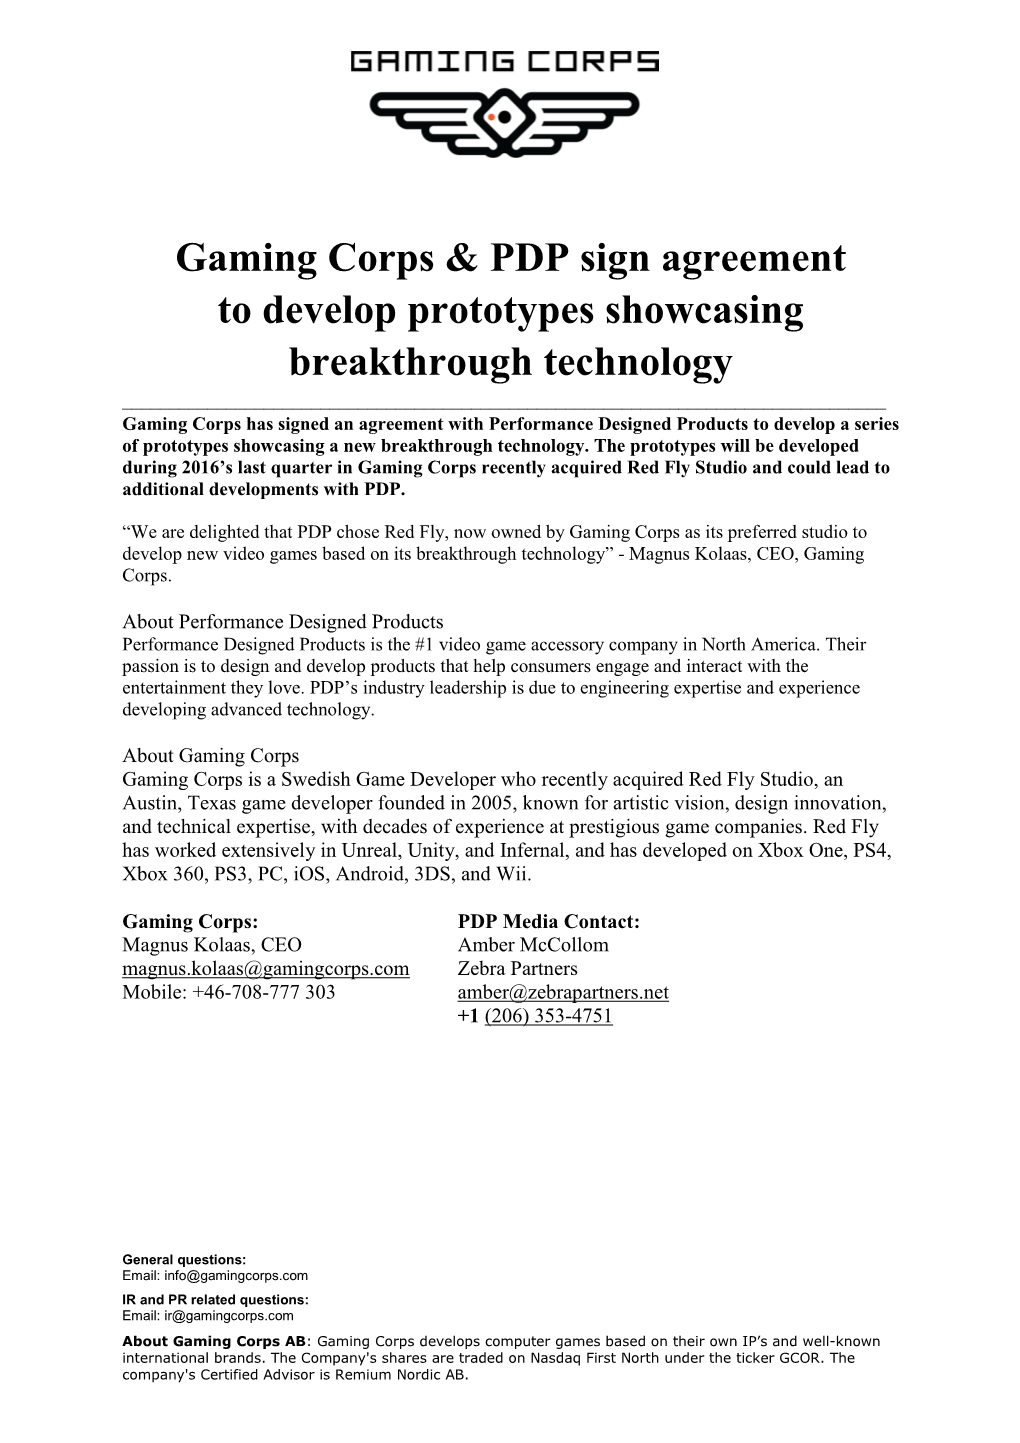 Gaming Corps & PDP Sign Agreement to Develop Prototypes Showcasing